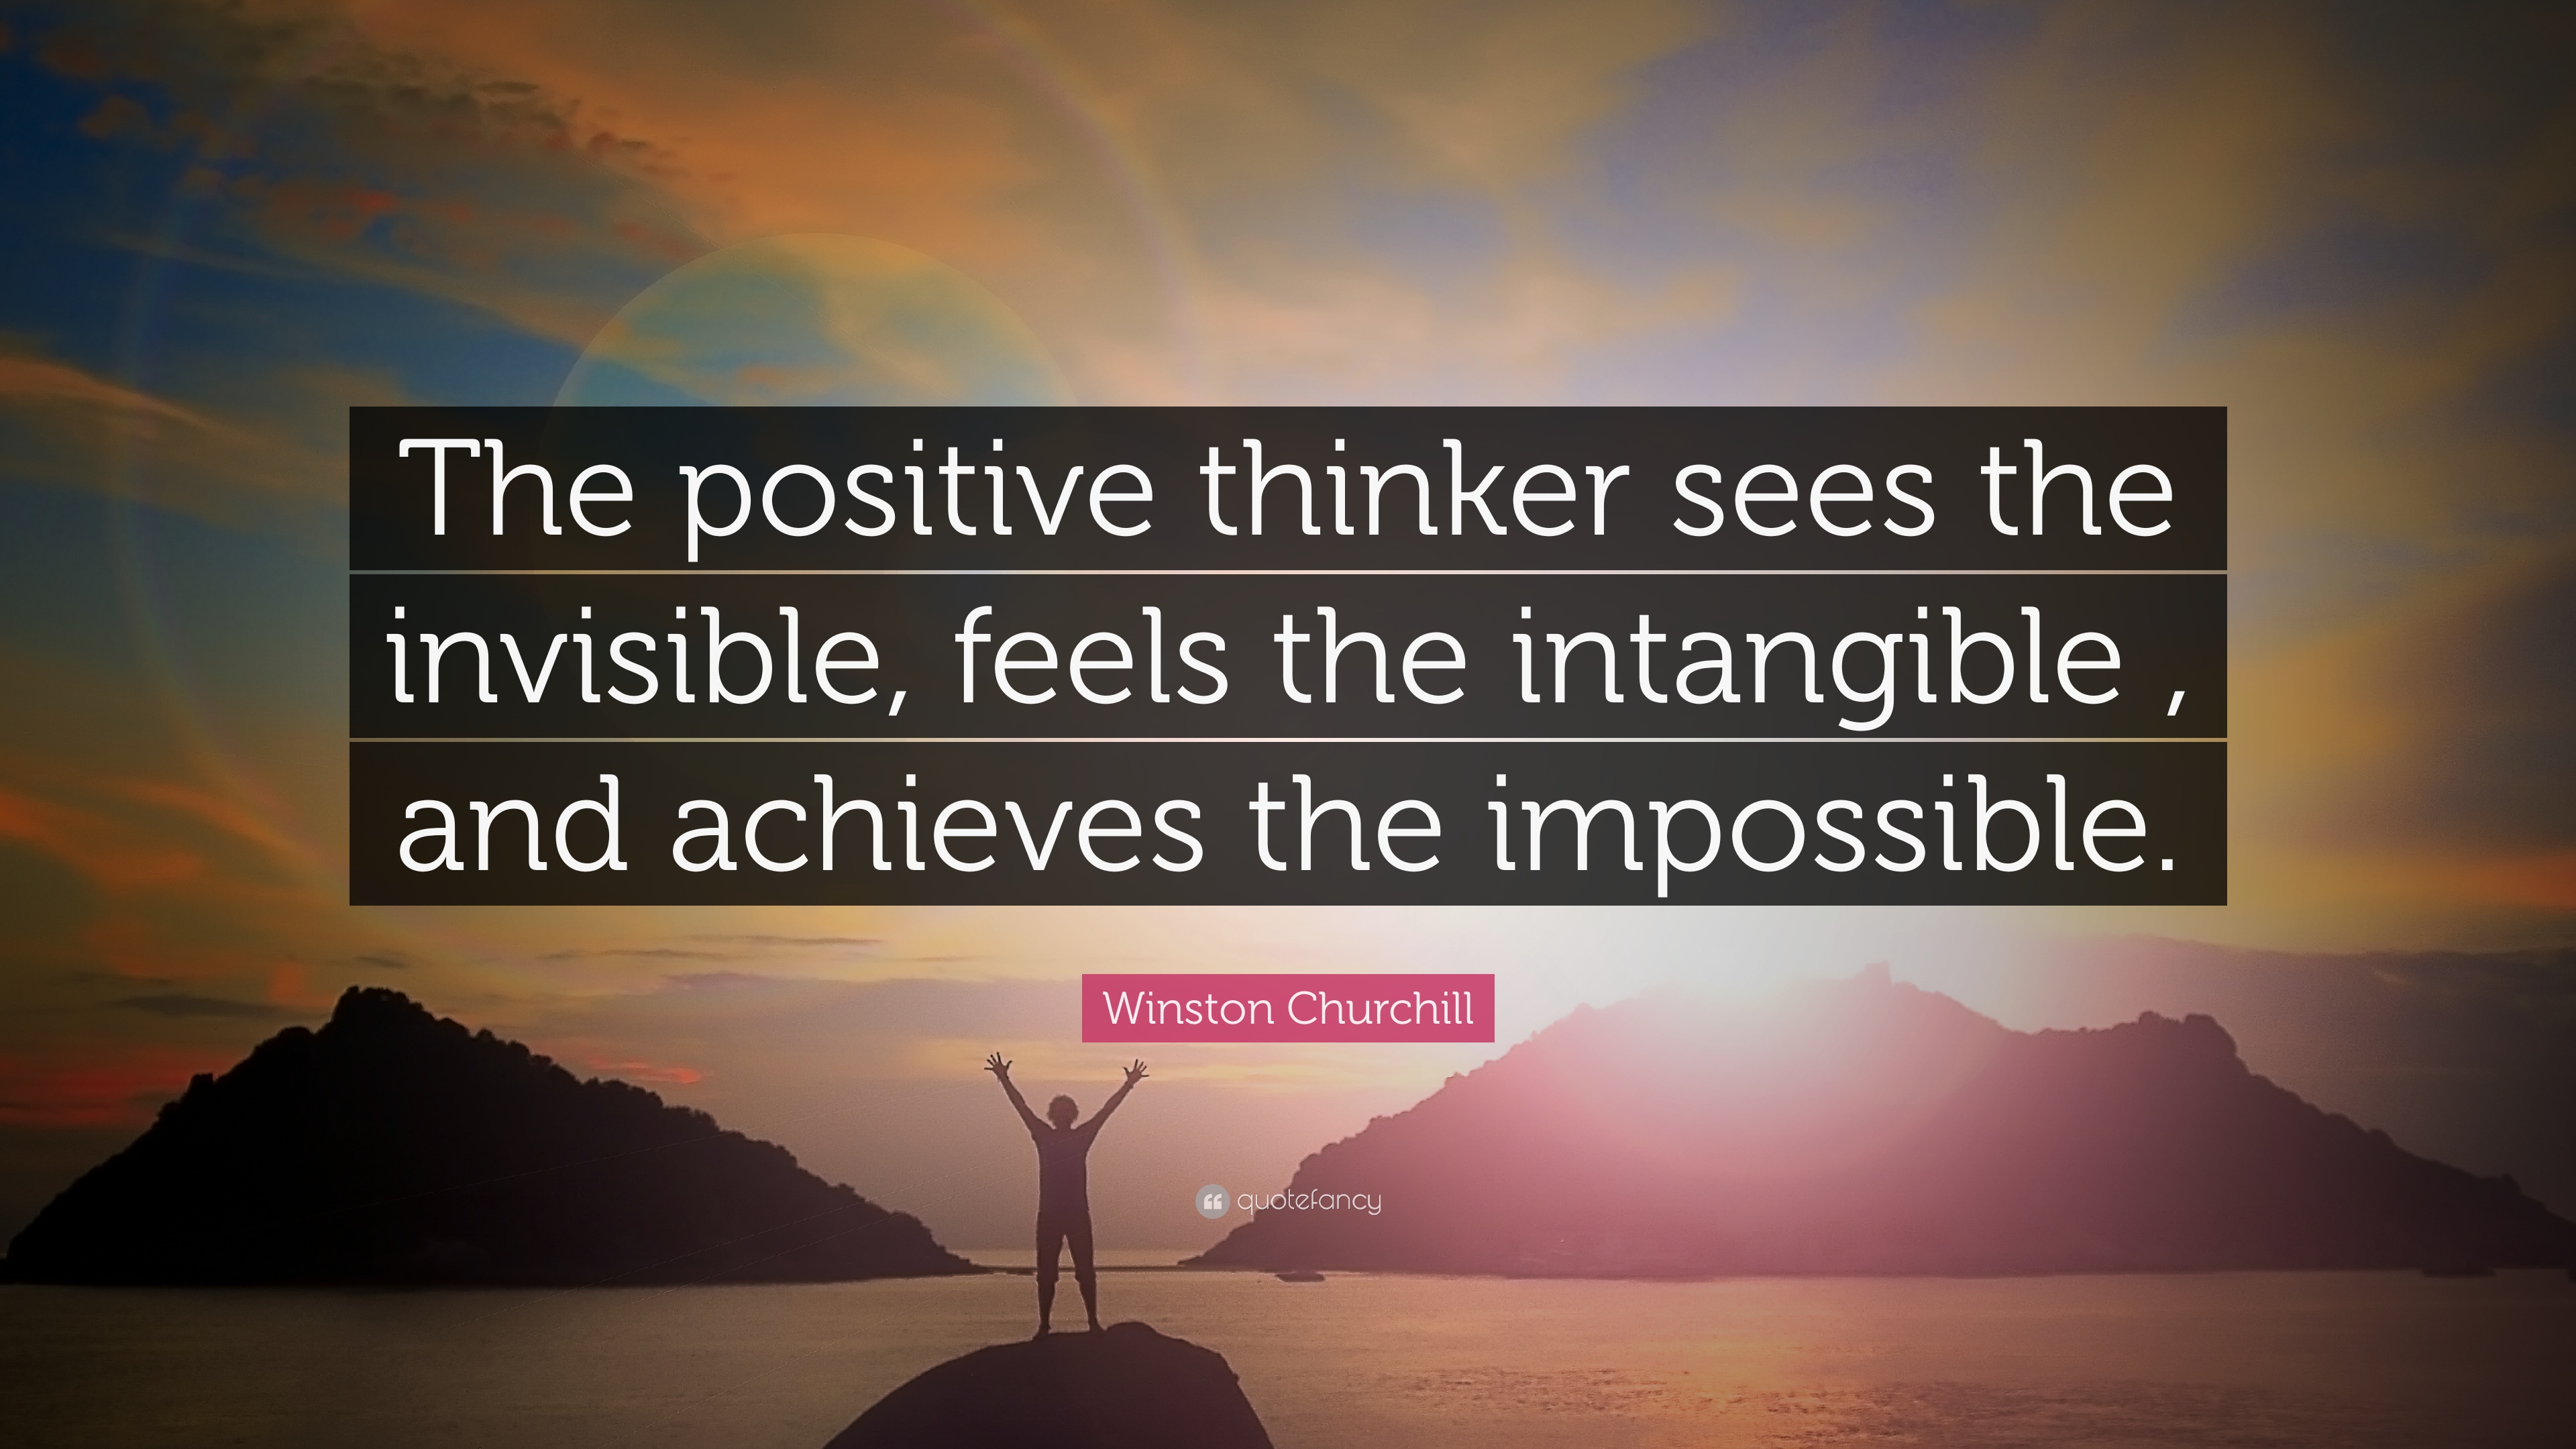 Winston Churchill Quote: “The positive thinker sees